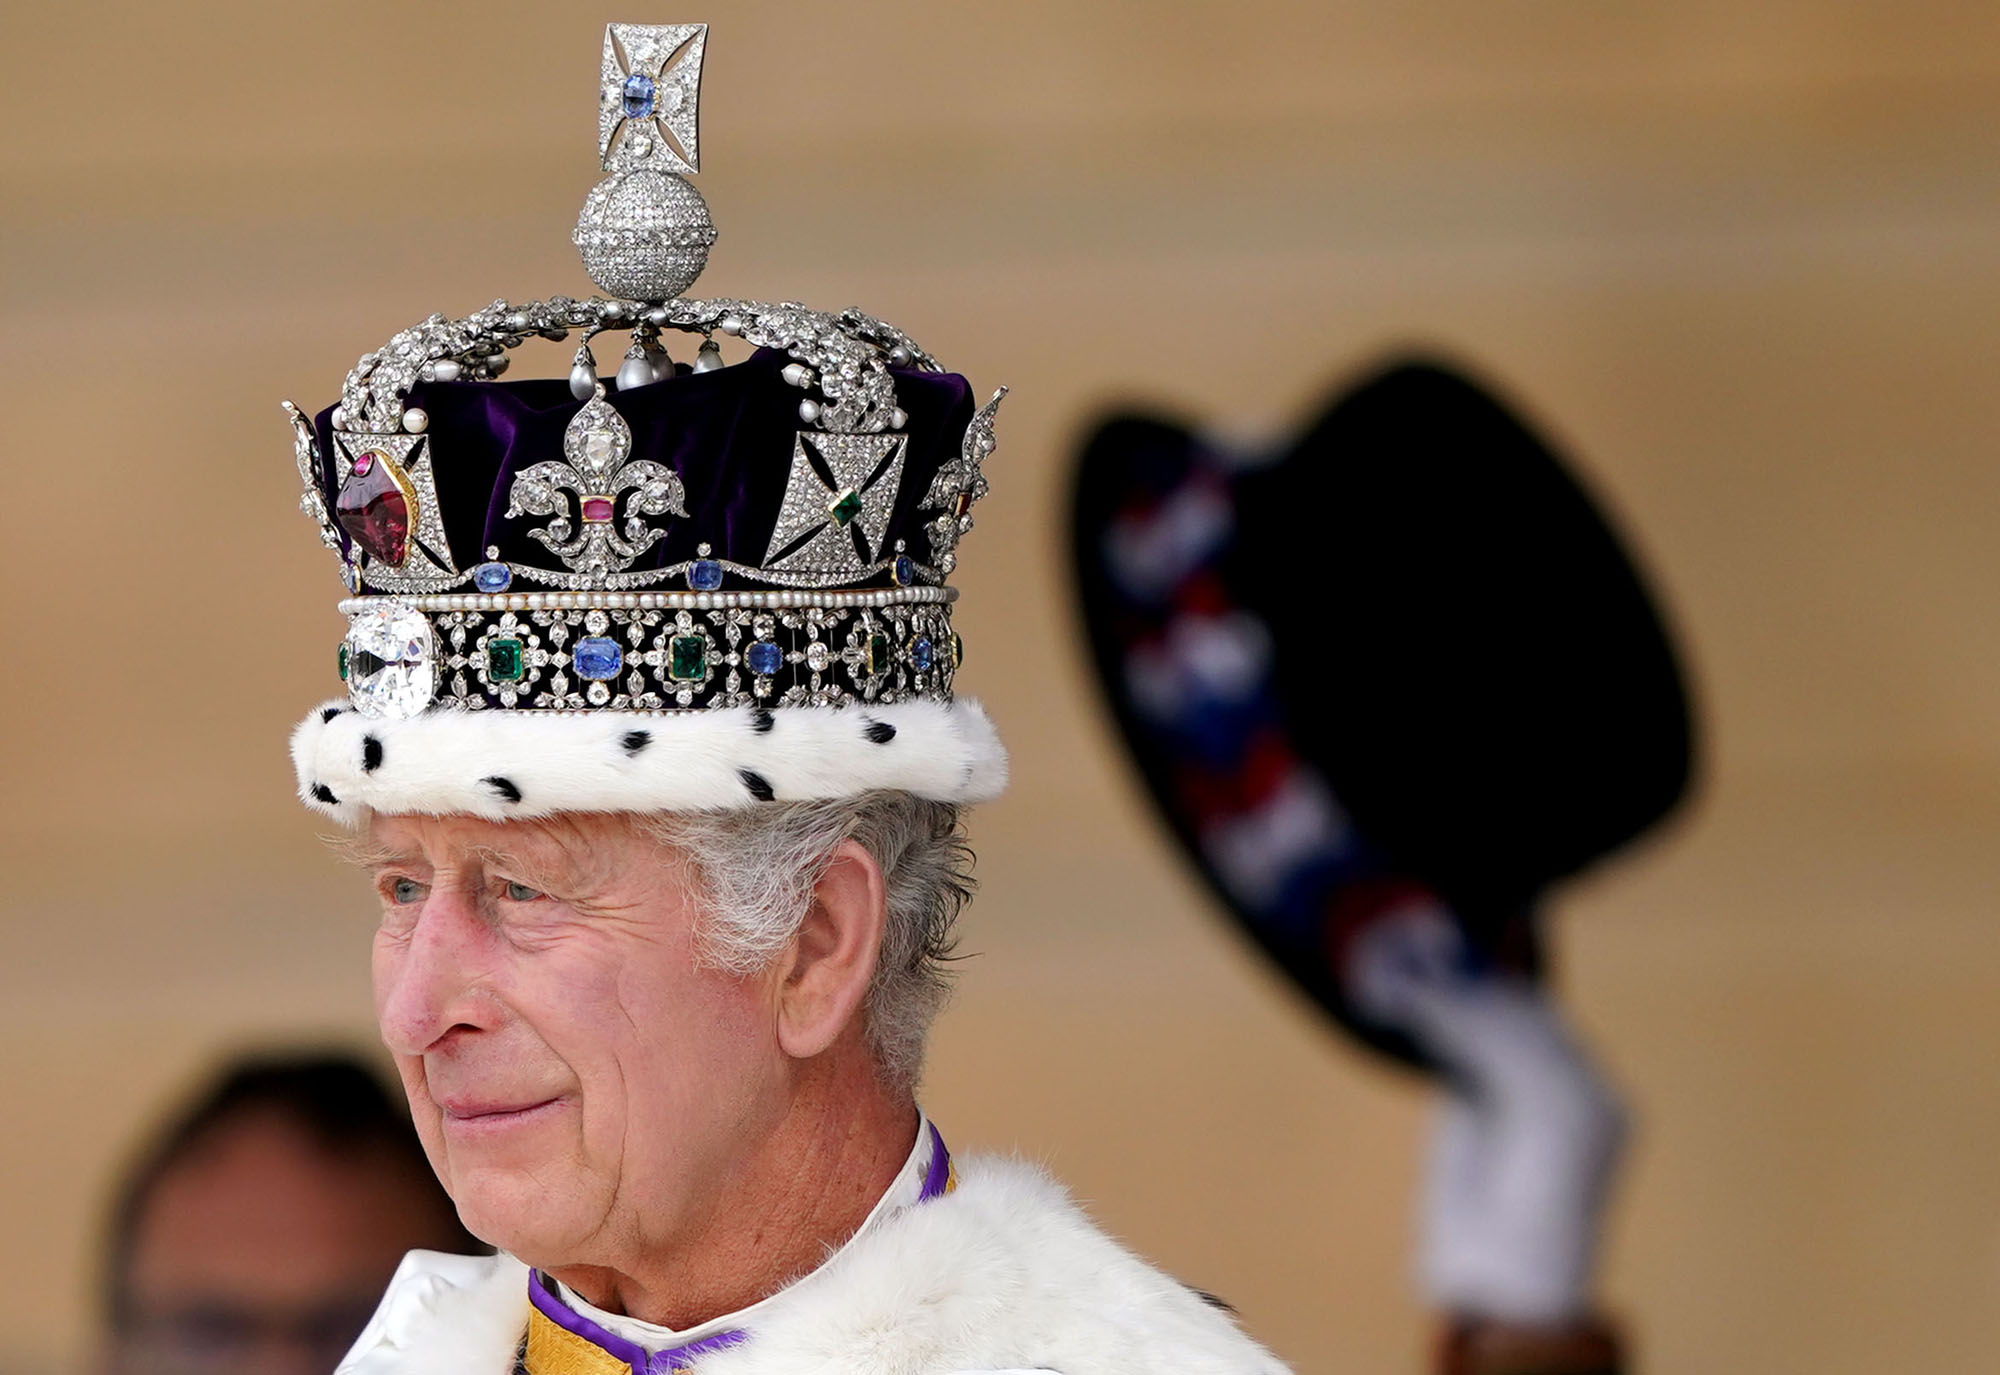 Everything You Need To Know About The Imperial State Crown Worn By King Charles At His Coronation